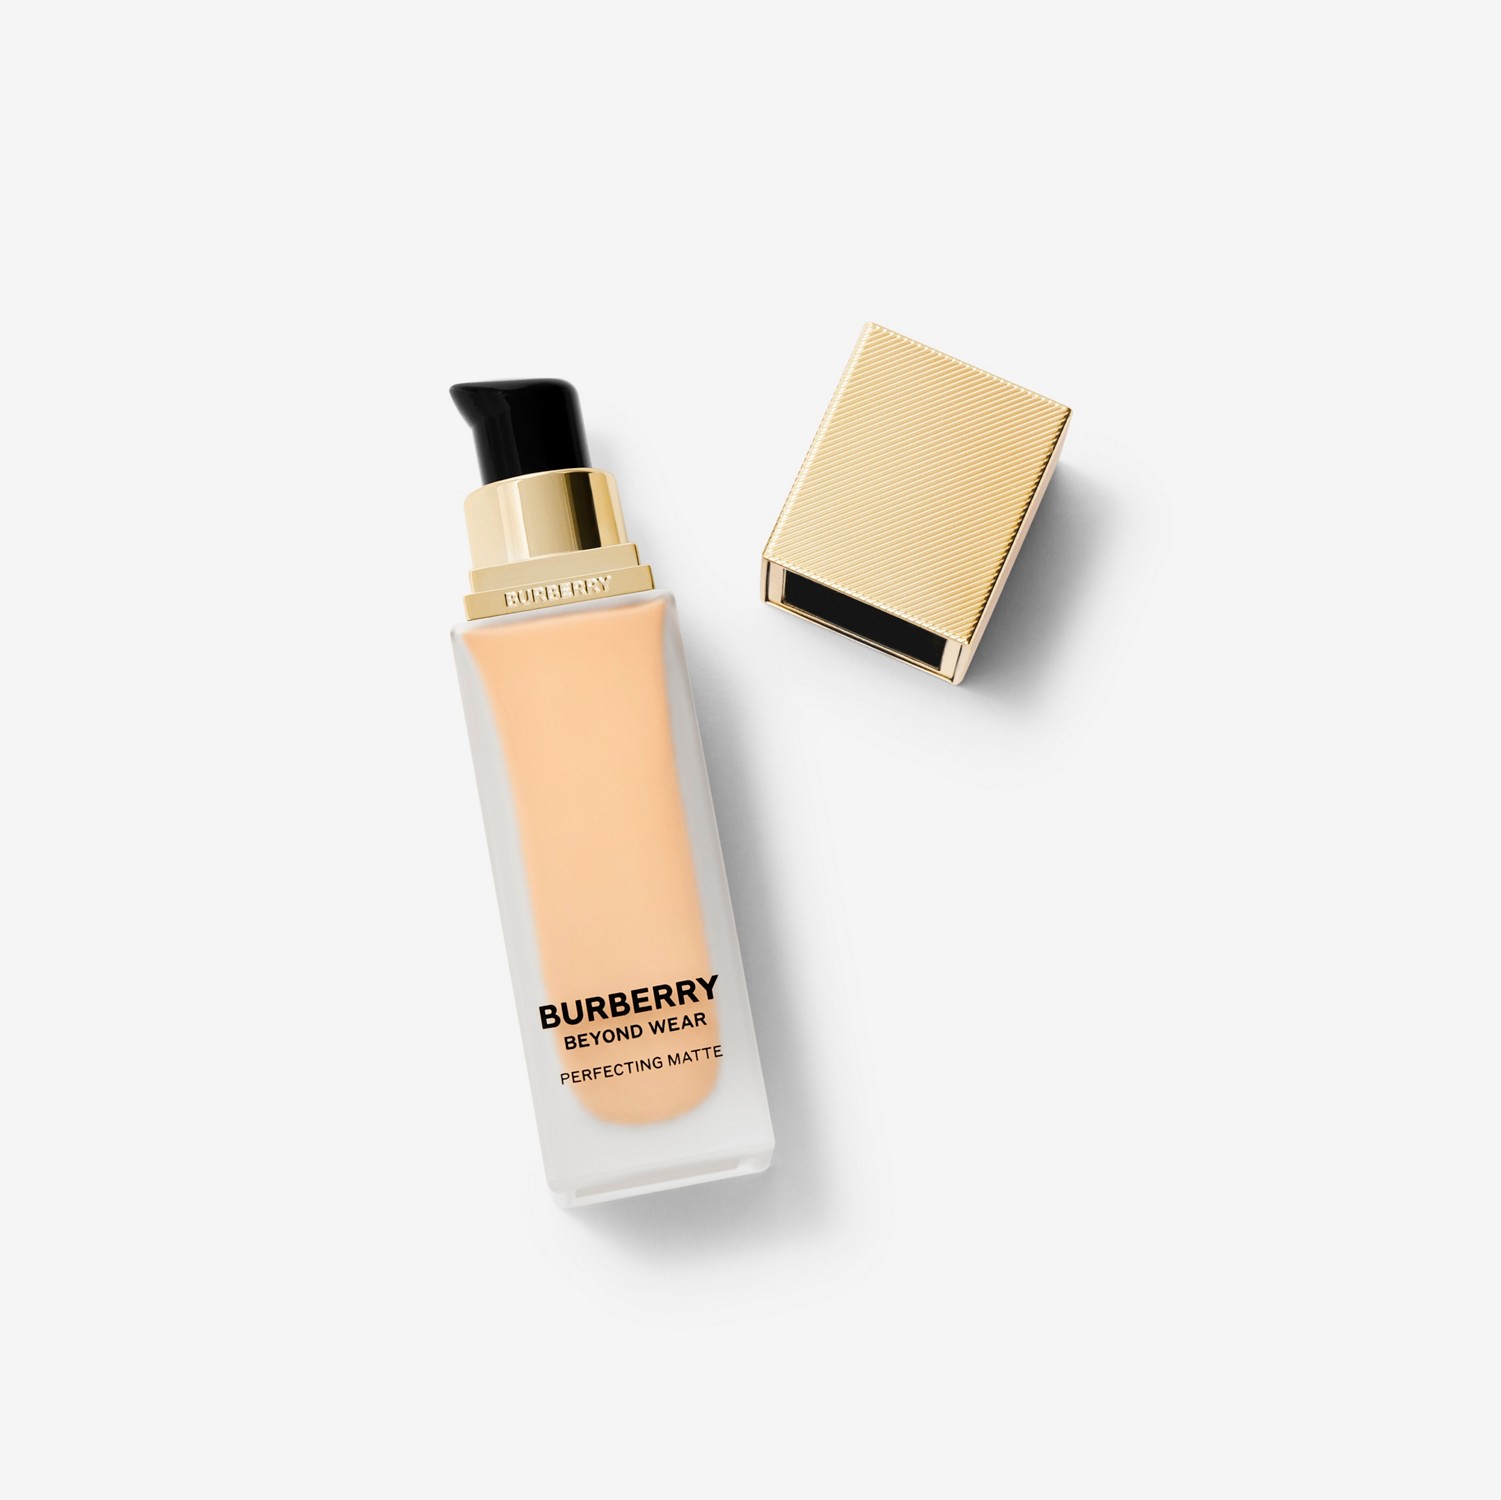 Beyond Wear Perfecting Matte Foundation – 20 Fair Warm - Mulheres | Burberry® oficial